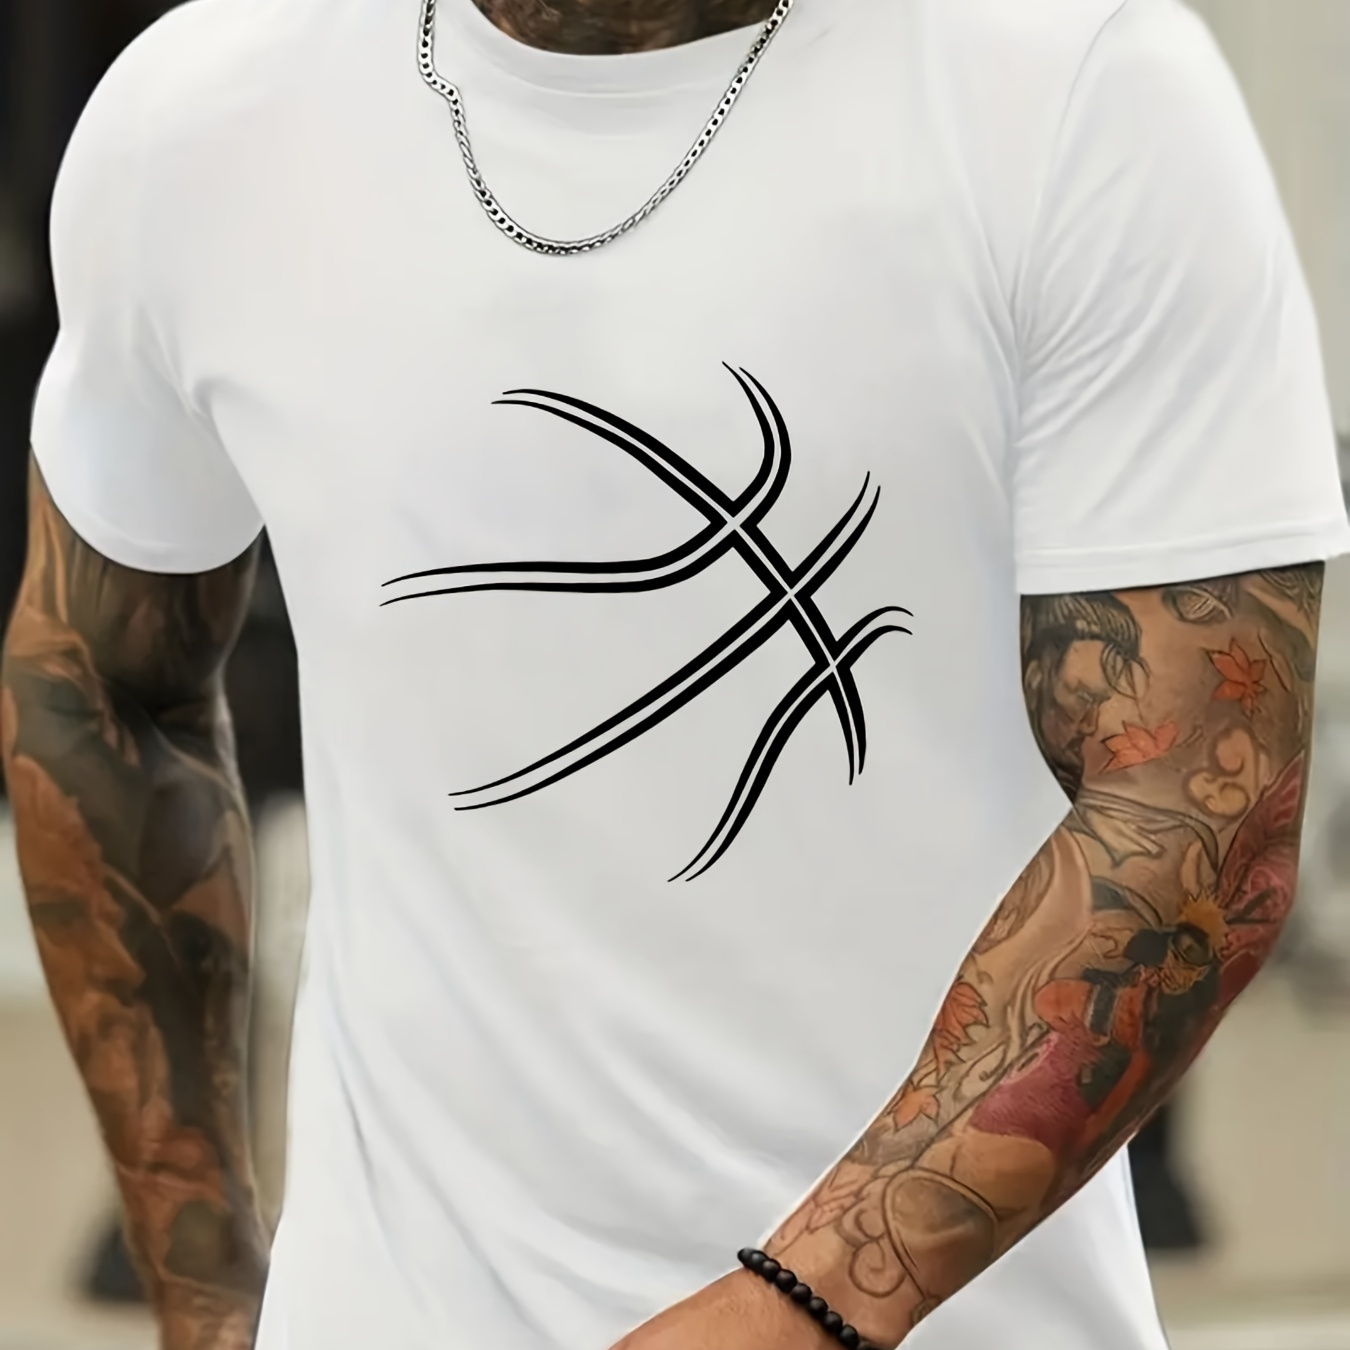 

Basketball Graphic Print, Men's Novel Graphic Design T-shirt, Casual Comfy Tees For Summer, Men's Clothing Tops For Daily Activities